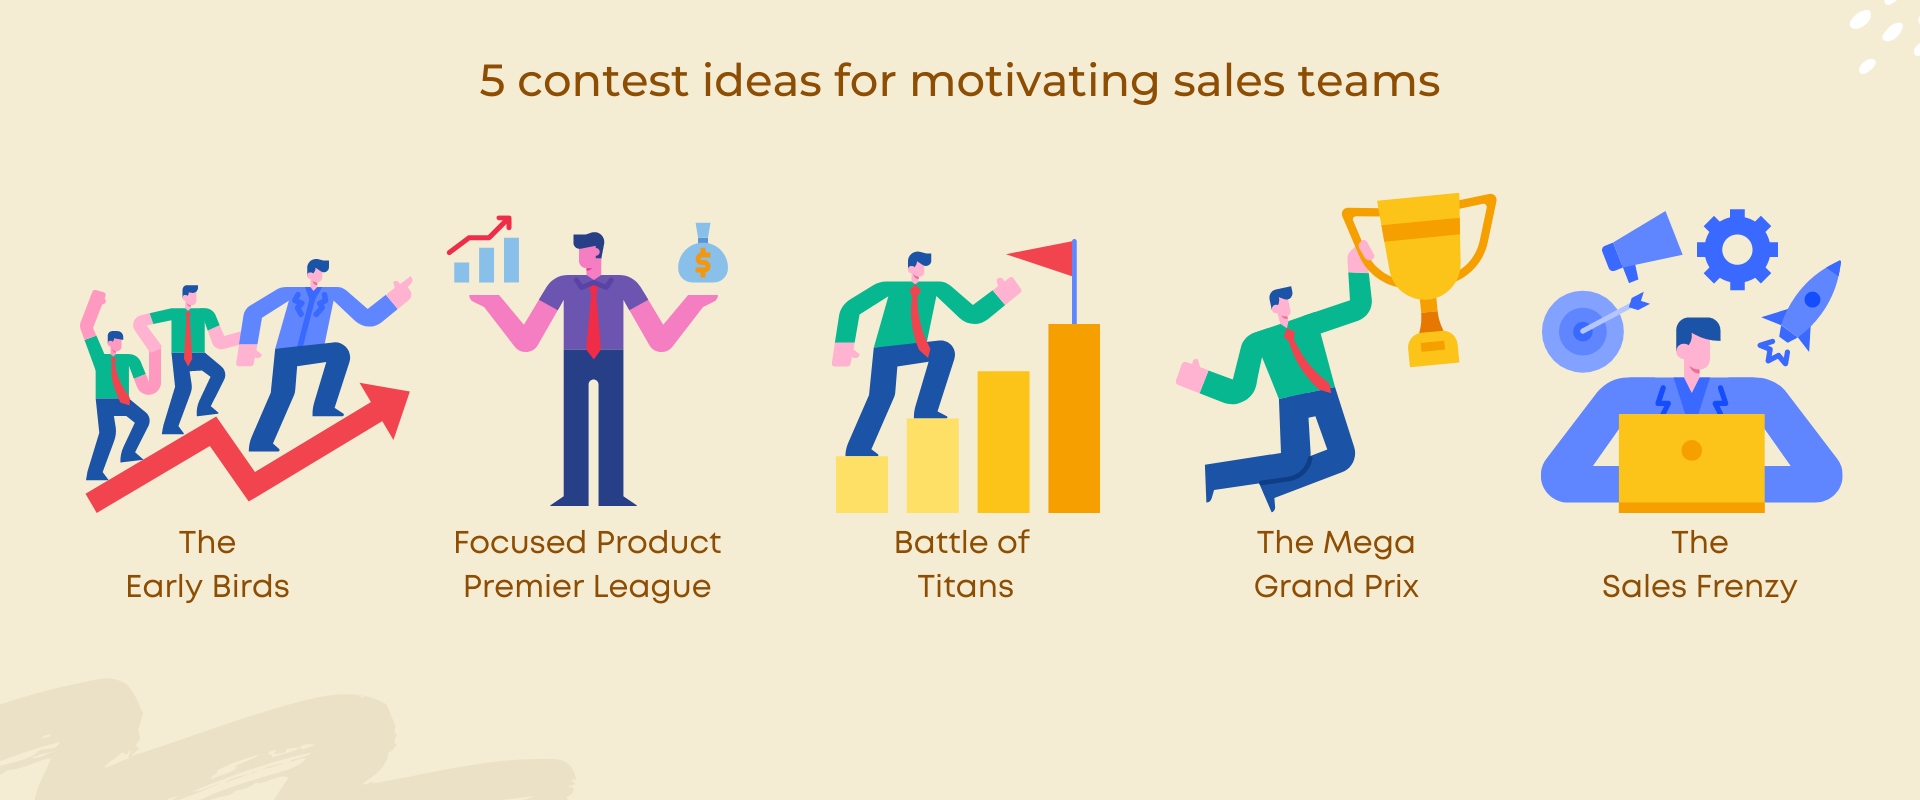 5 contest ideas for motivating sales teams (1)